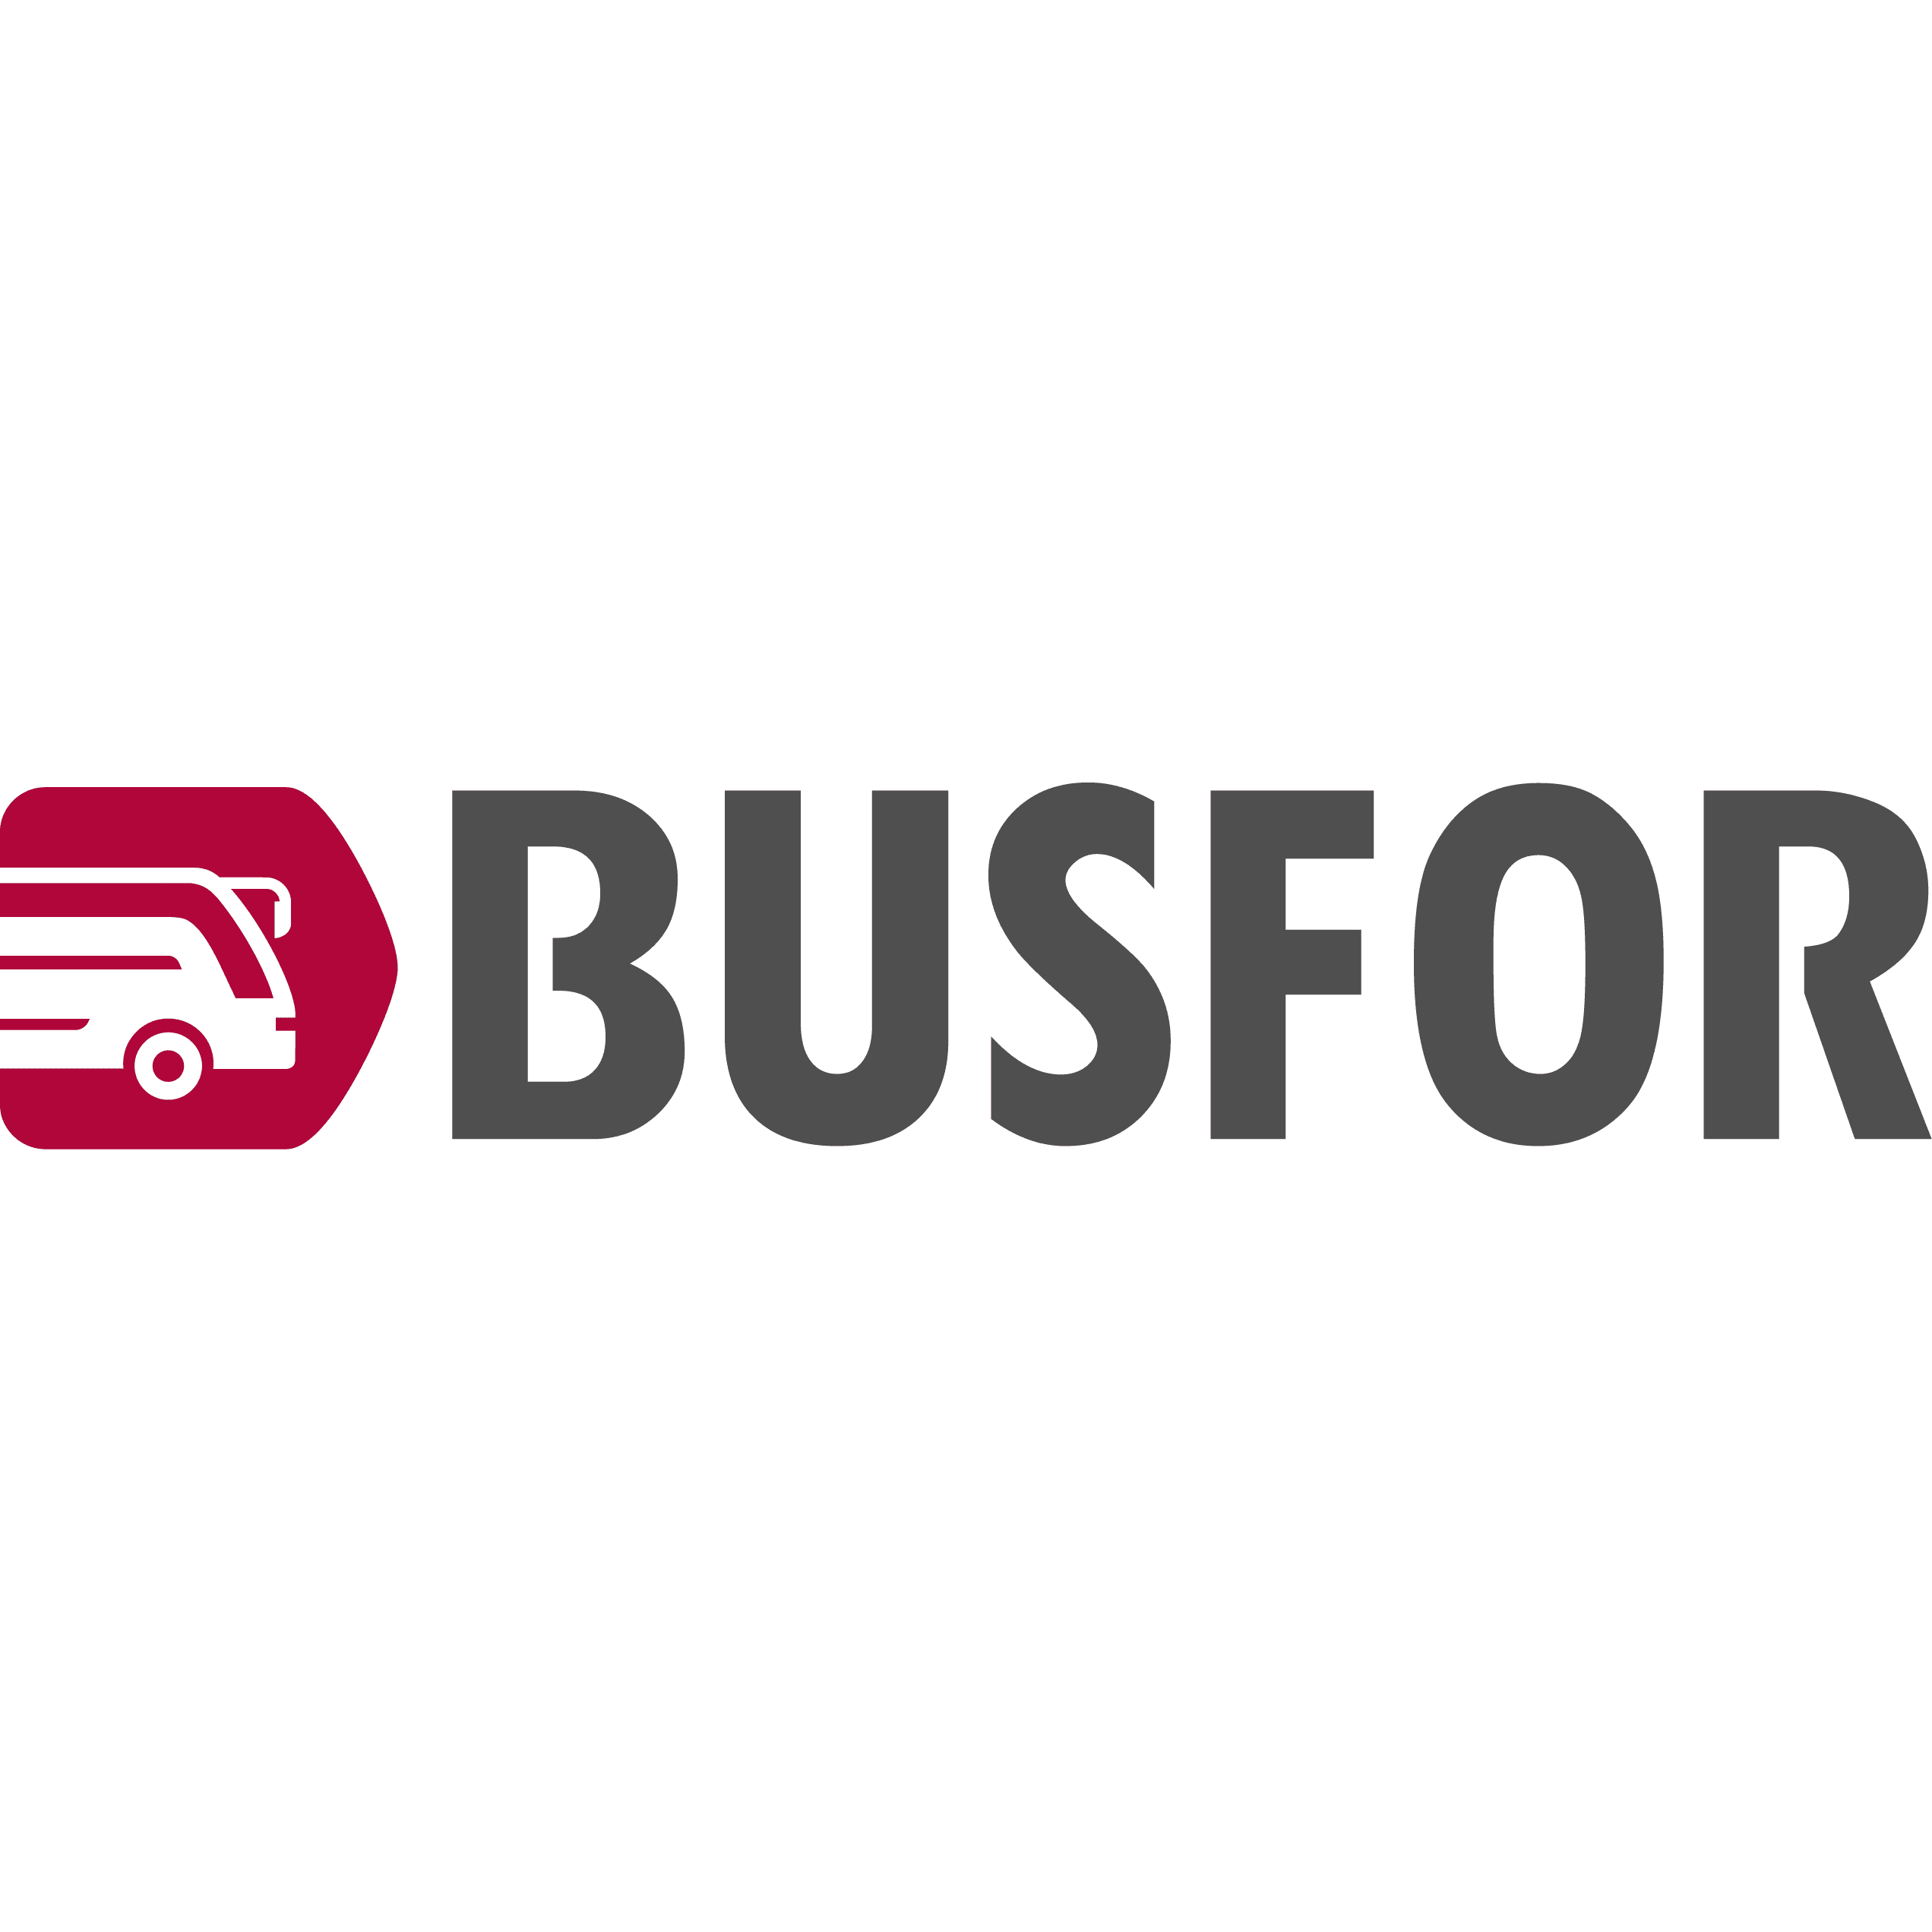 Learn How to Buy Bus Tickets with the BUSFOR App